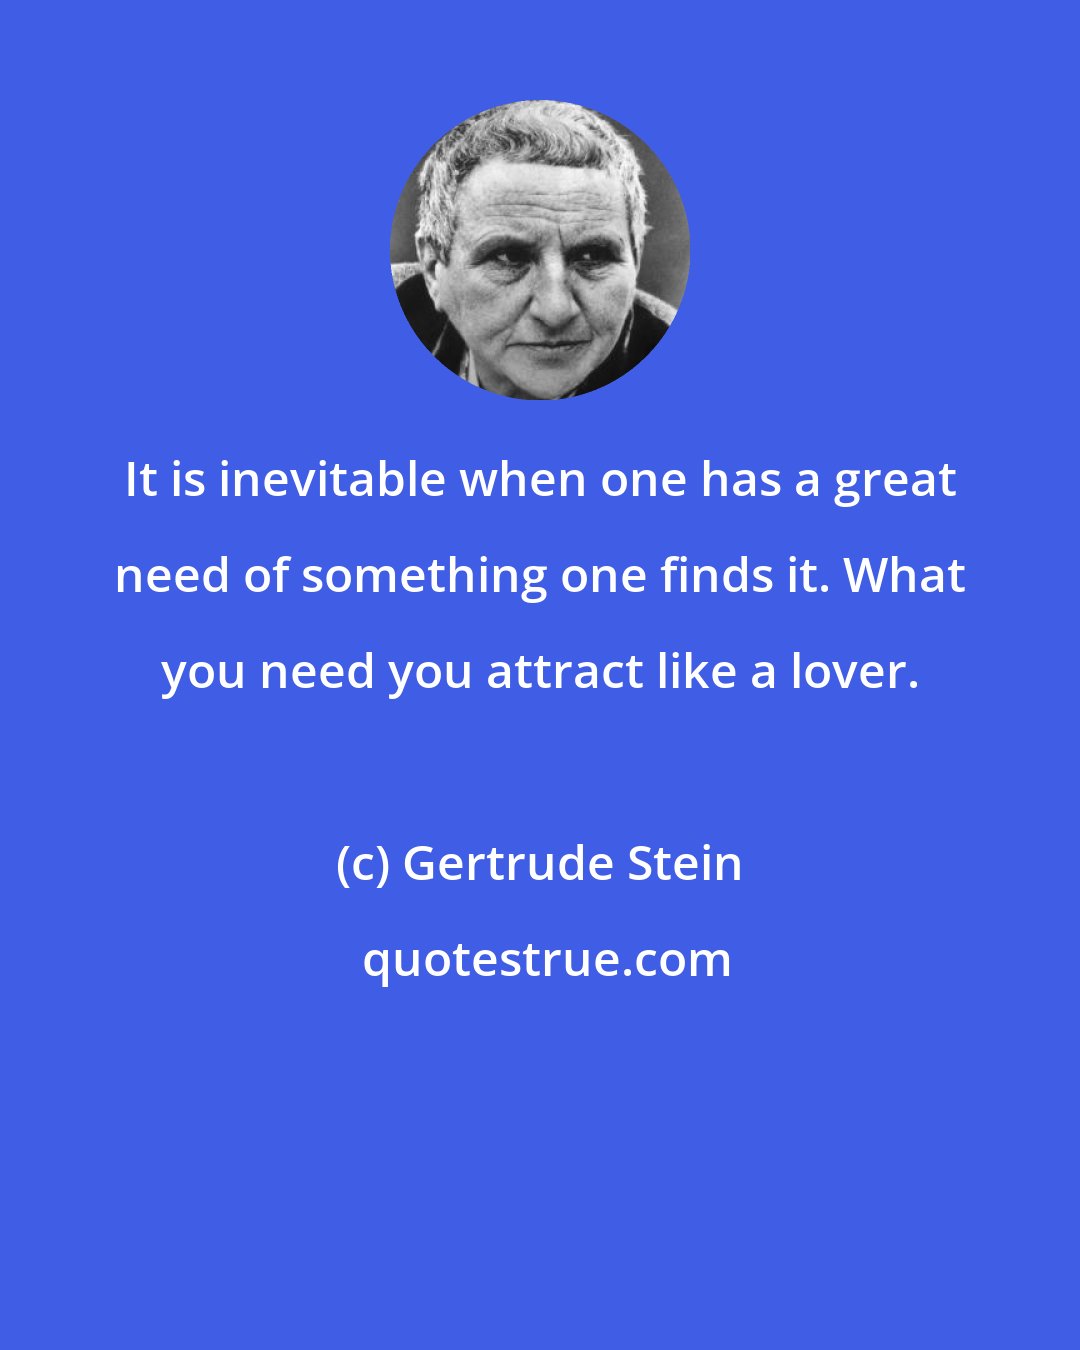 Gertrude Stein: It is inevitable when one has a great need of something one finds it. What you need you attract like a lover.